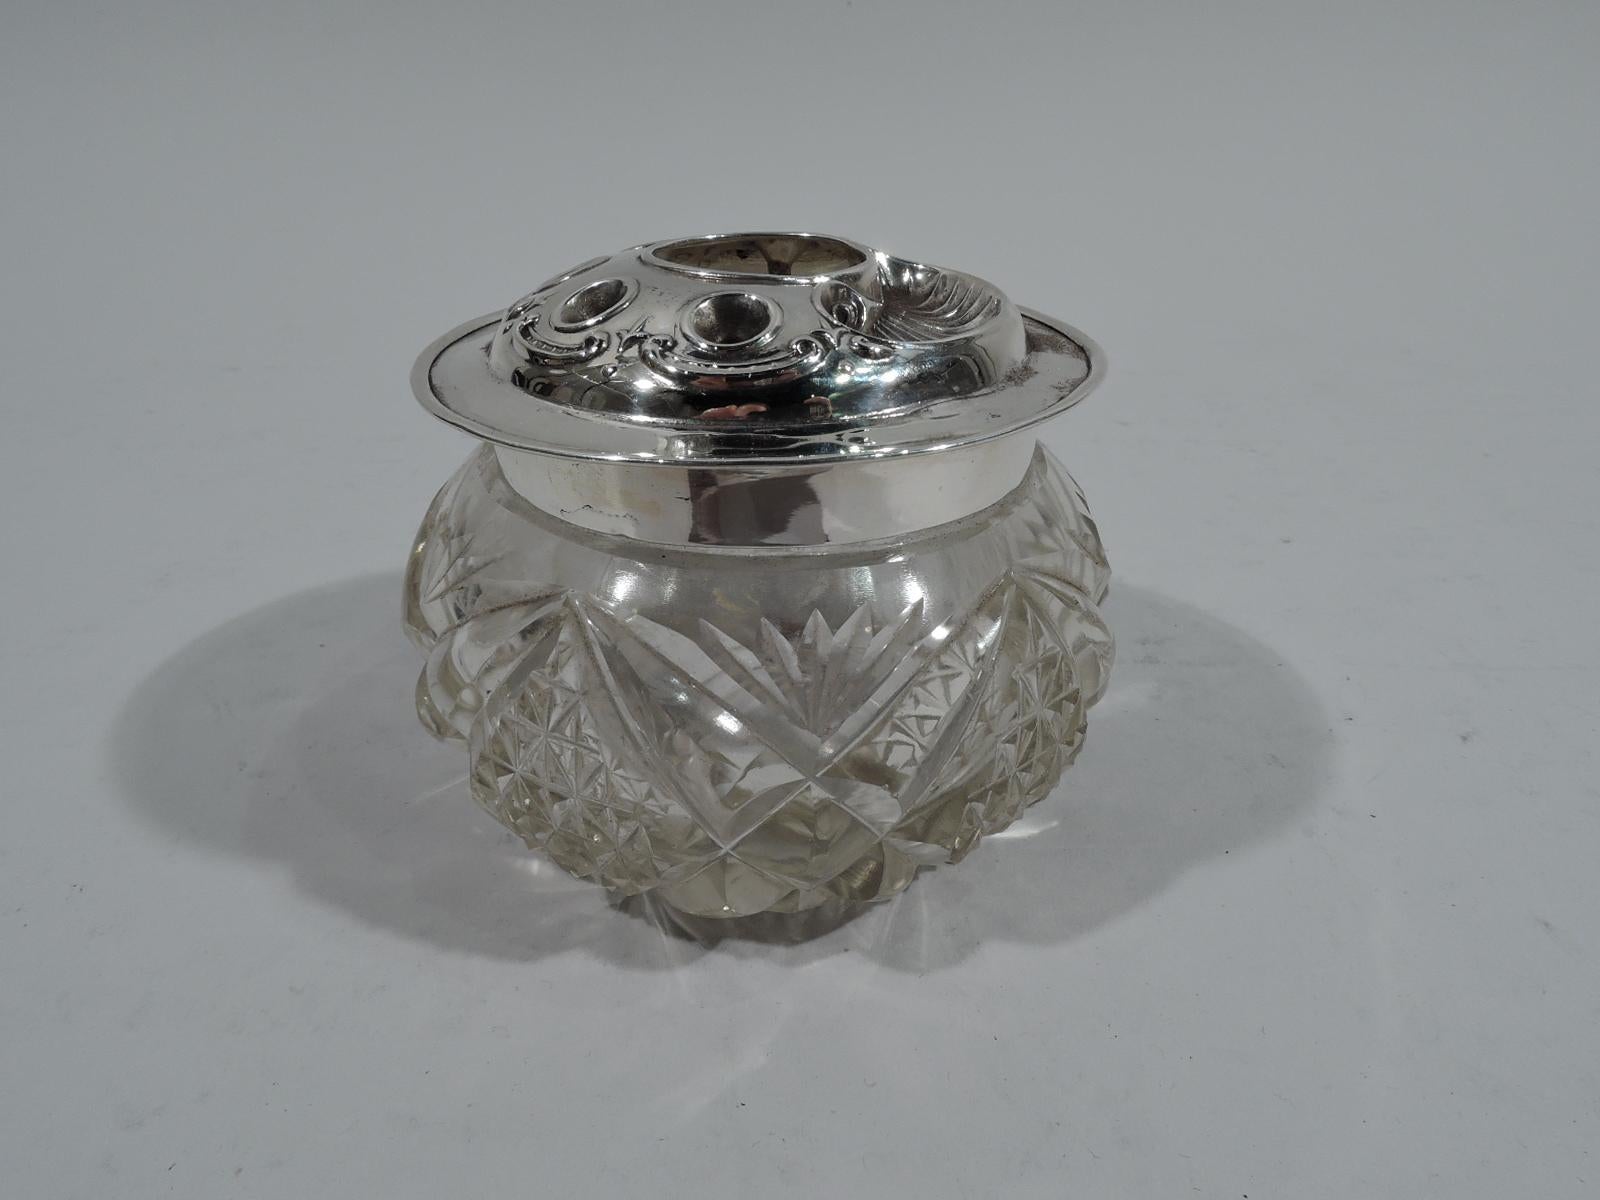 Edwardian glass jar with sterling silver cover. Made by Arthur Wilmore Pennington in Birmingham in 1908. Jar round and curved with short straight neck. Cut ferns, diaper, and stars. Cover has central hair receiver hole and small pin holes. Shell and